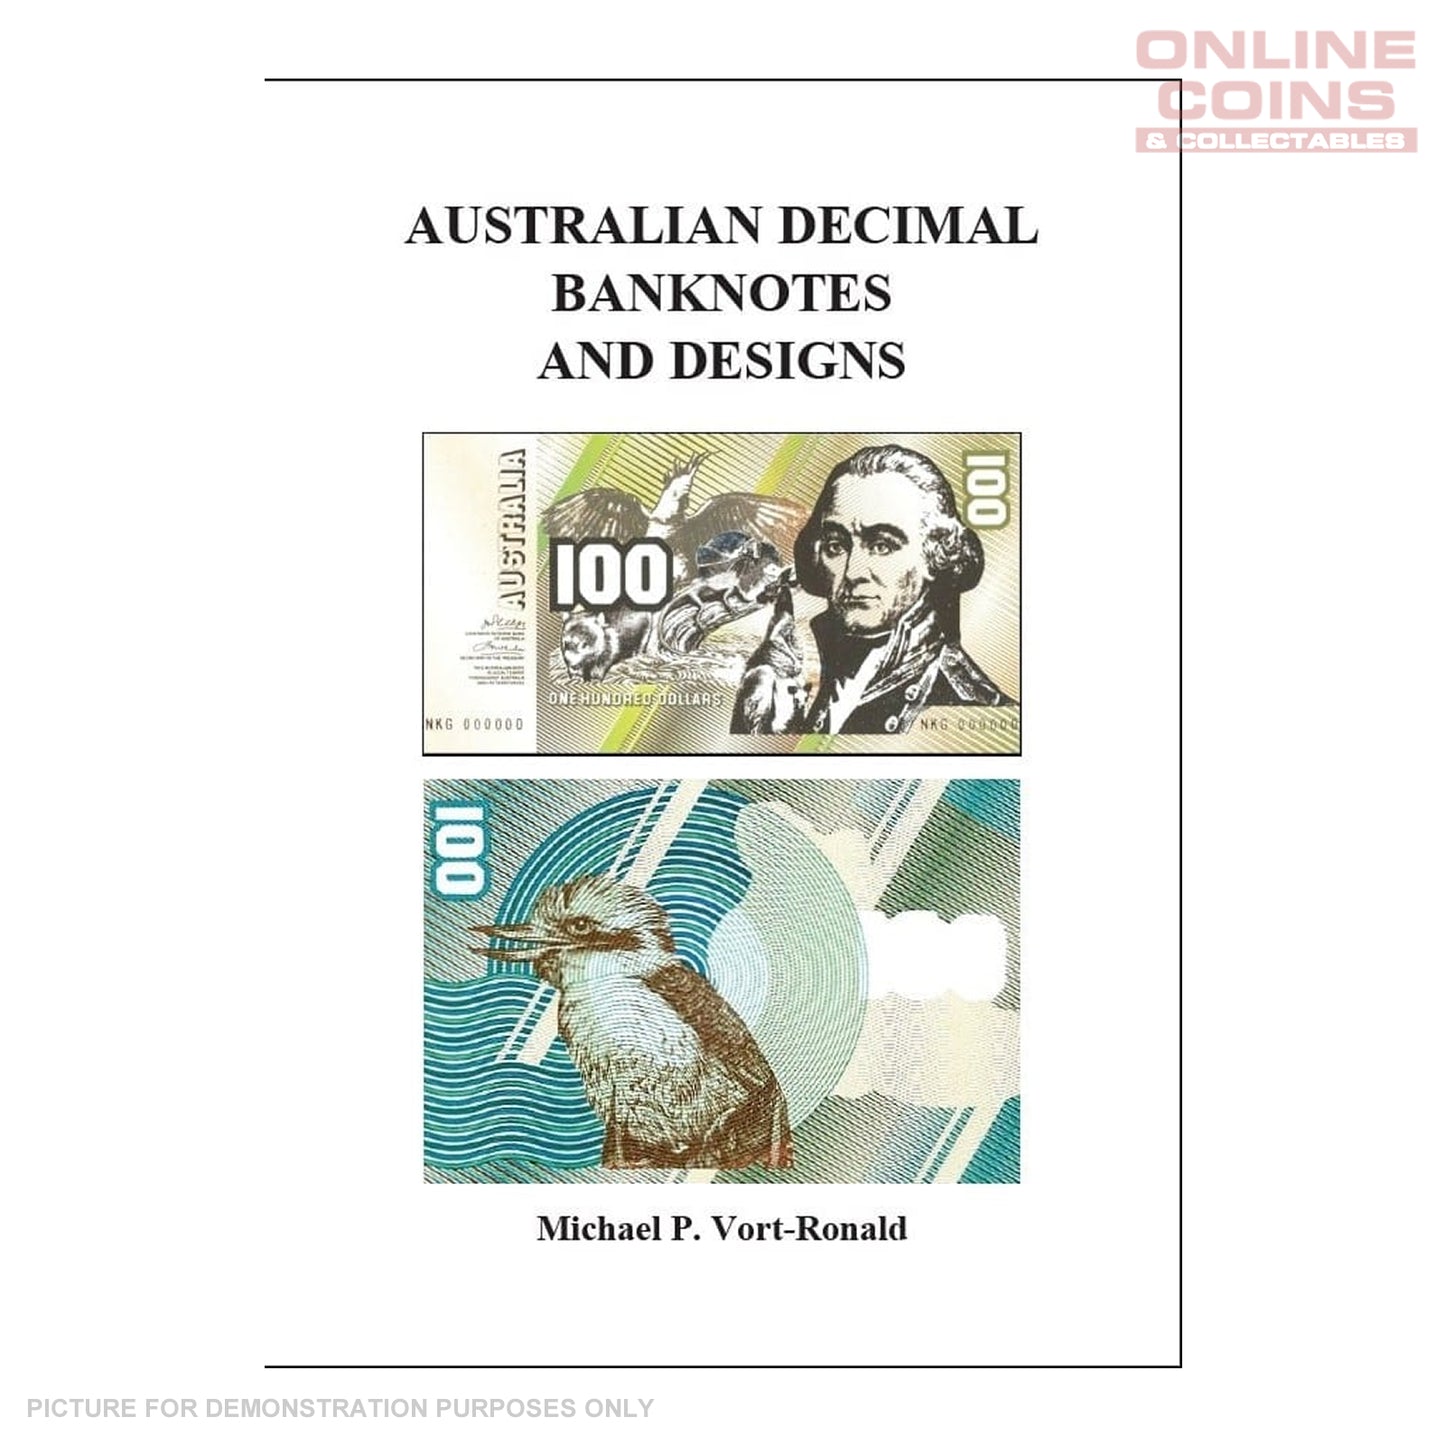 Australian Decimal Banknotes and Designs Catalogue by MICHAEL VORT-RONALD